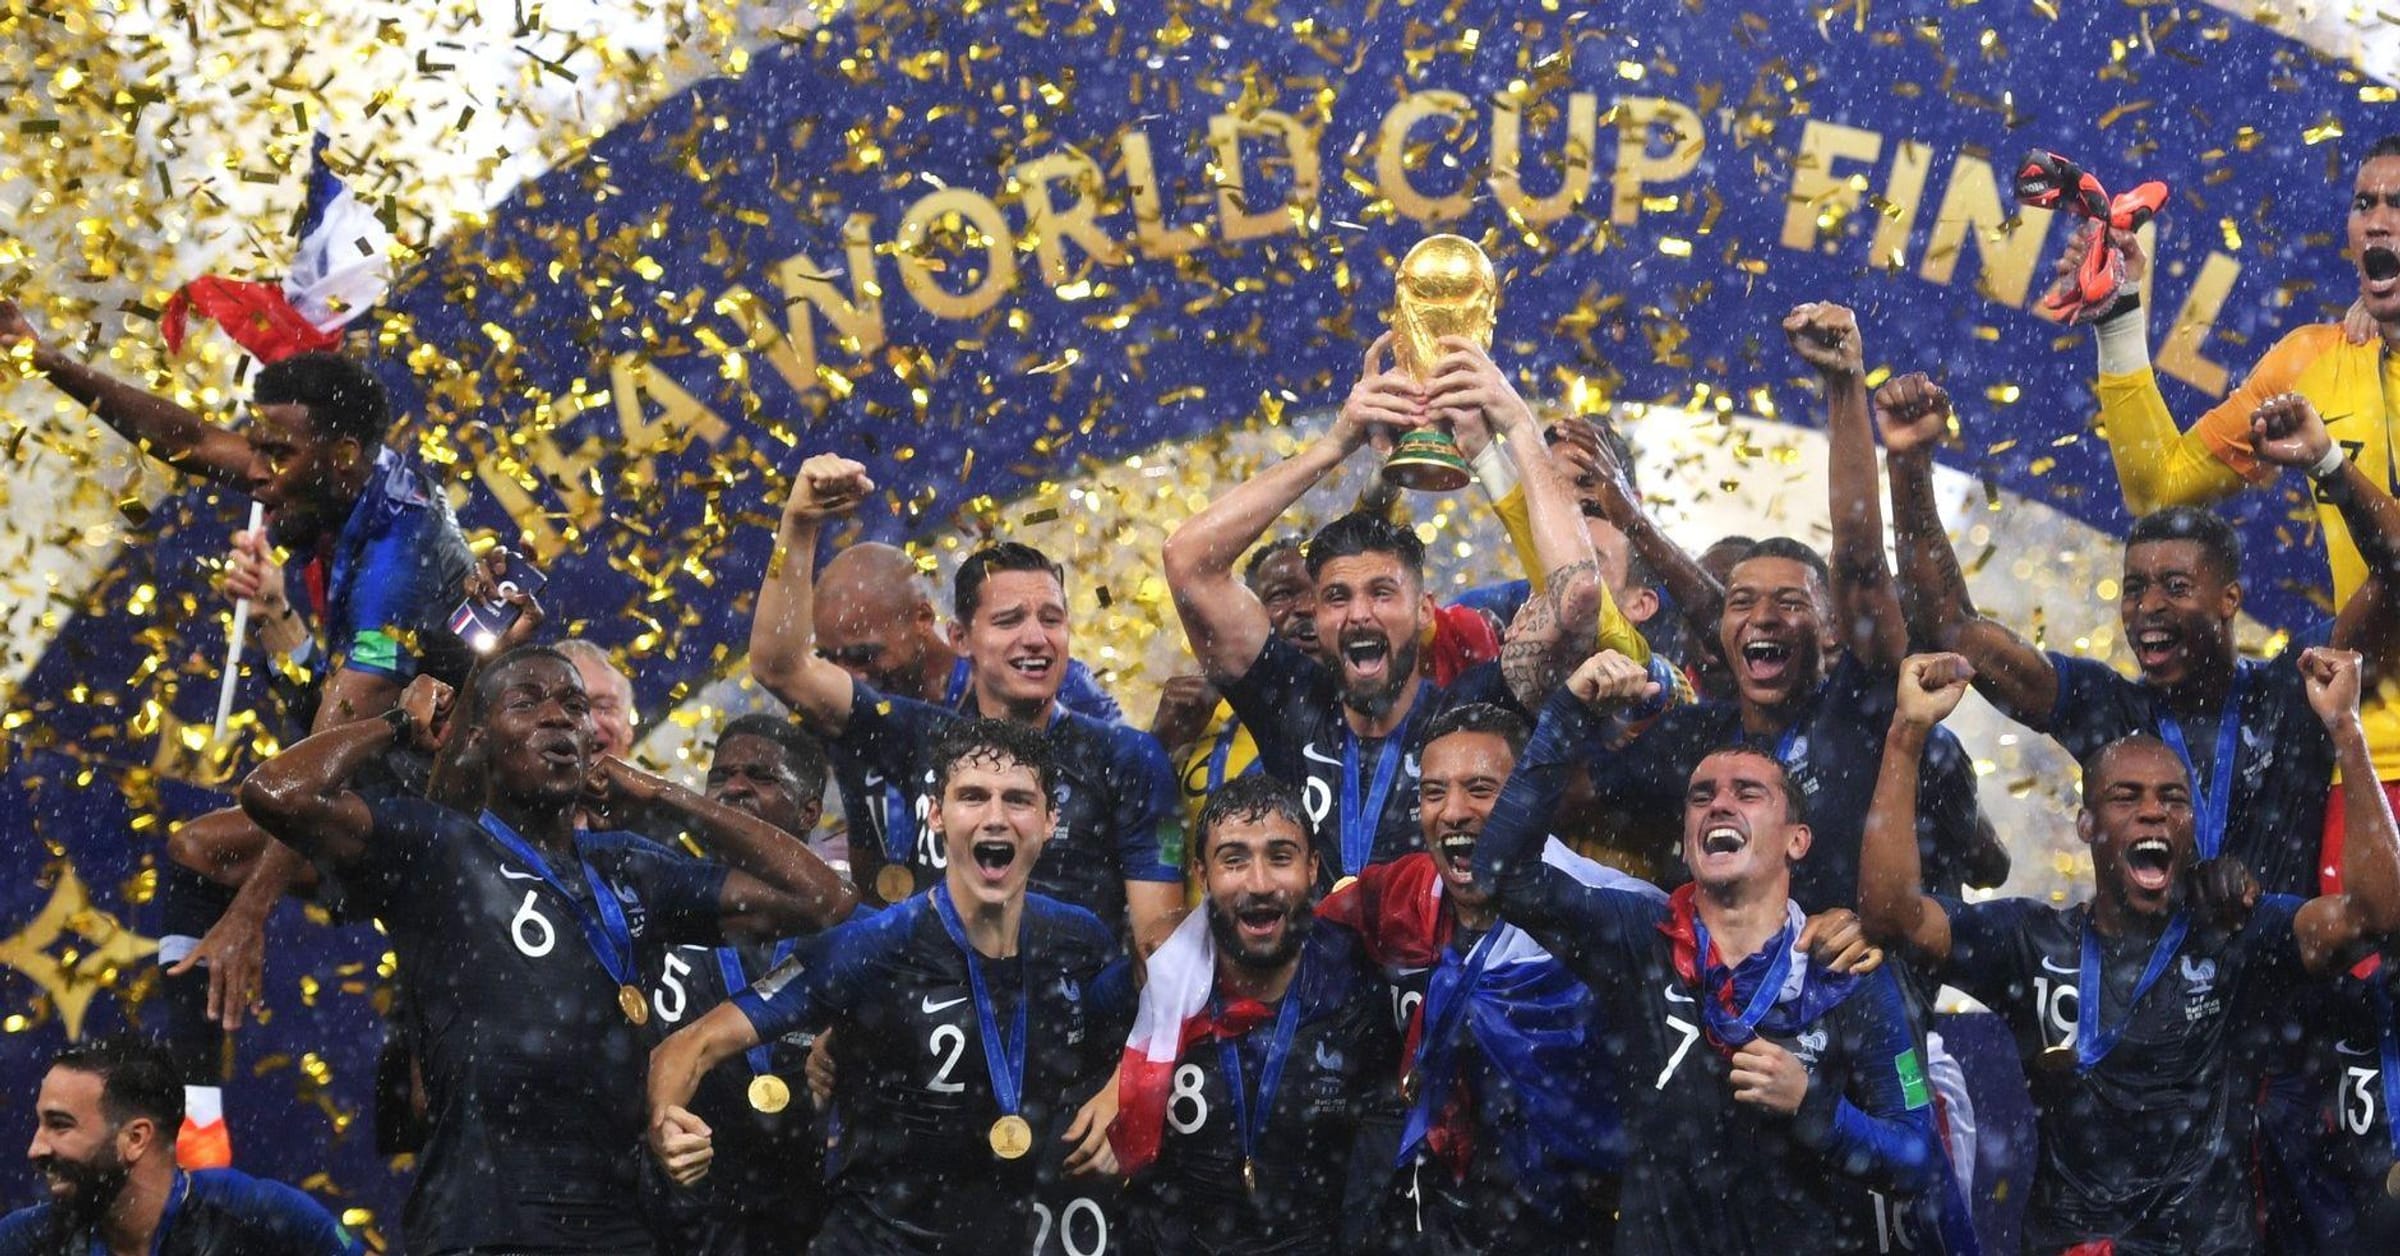 Culture Shock: The 2014 FIFA World Cup as Experienced by an